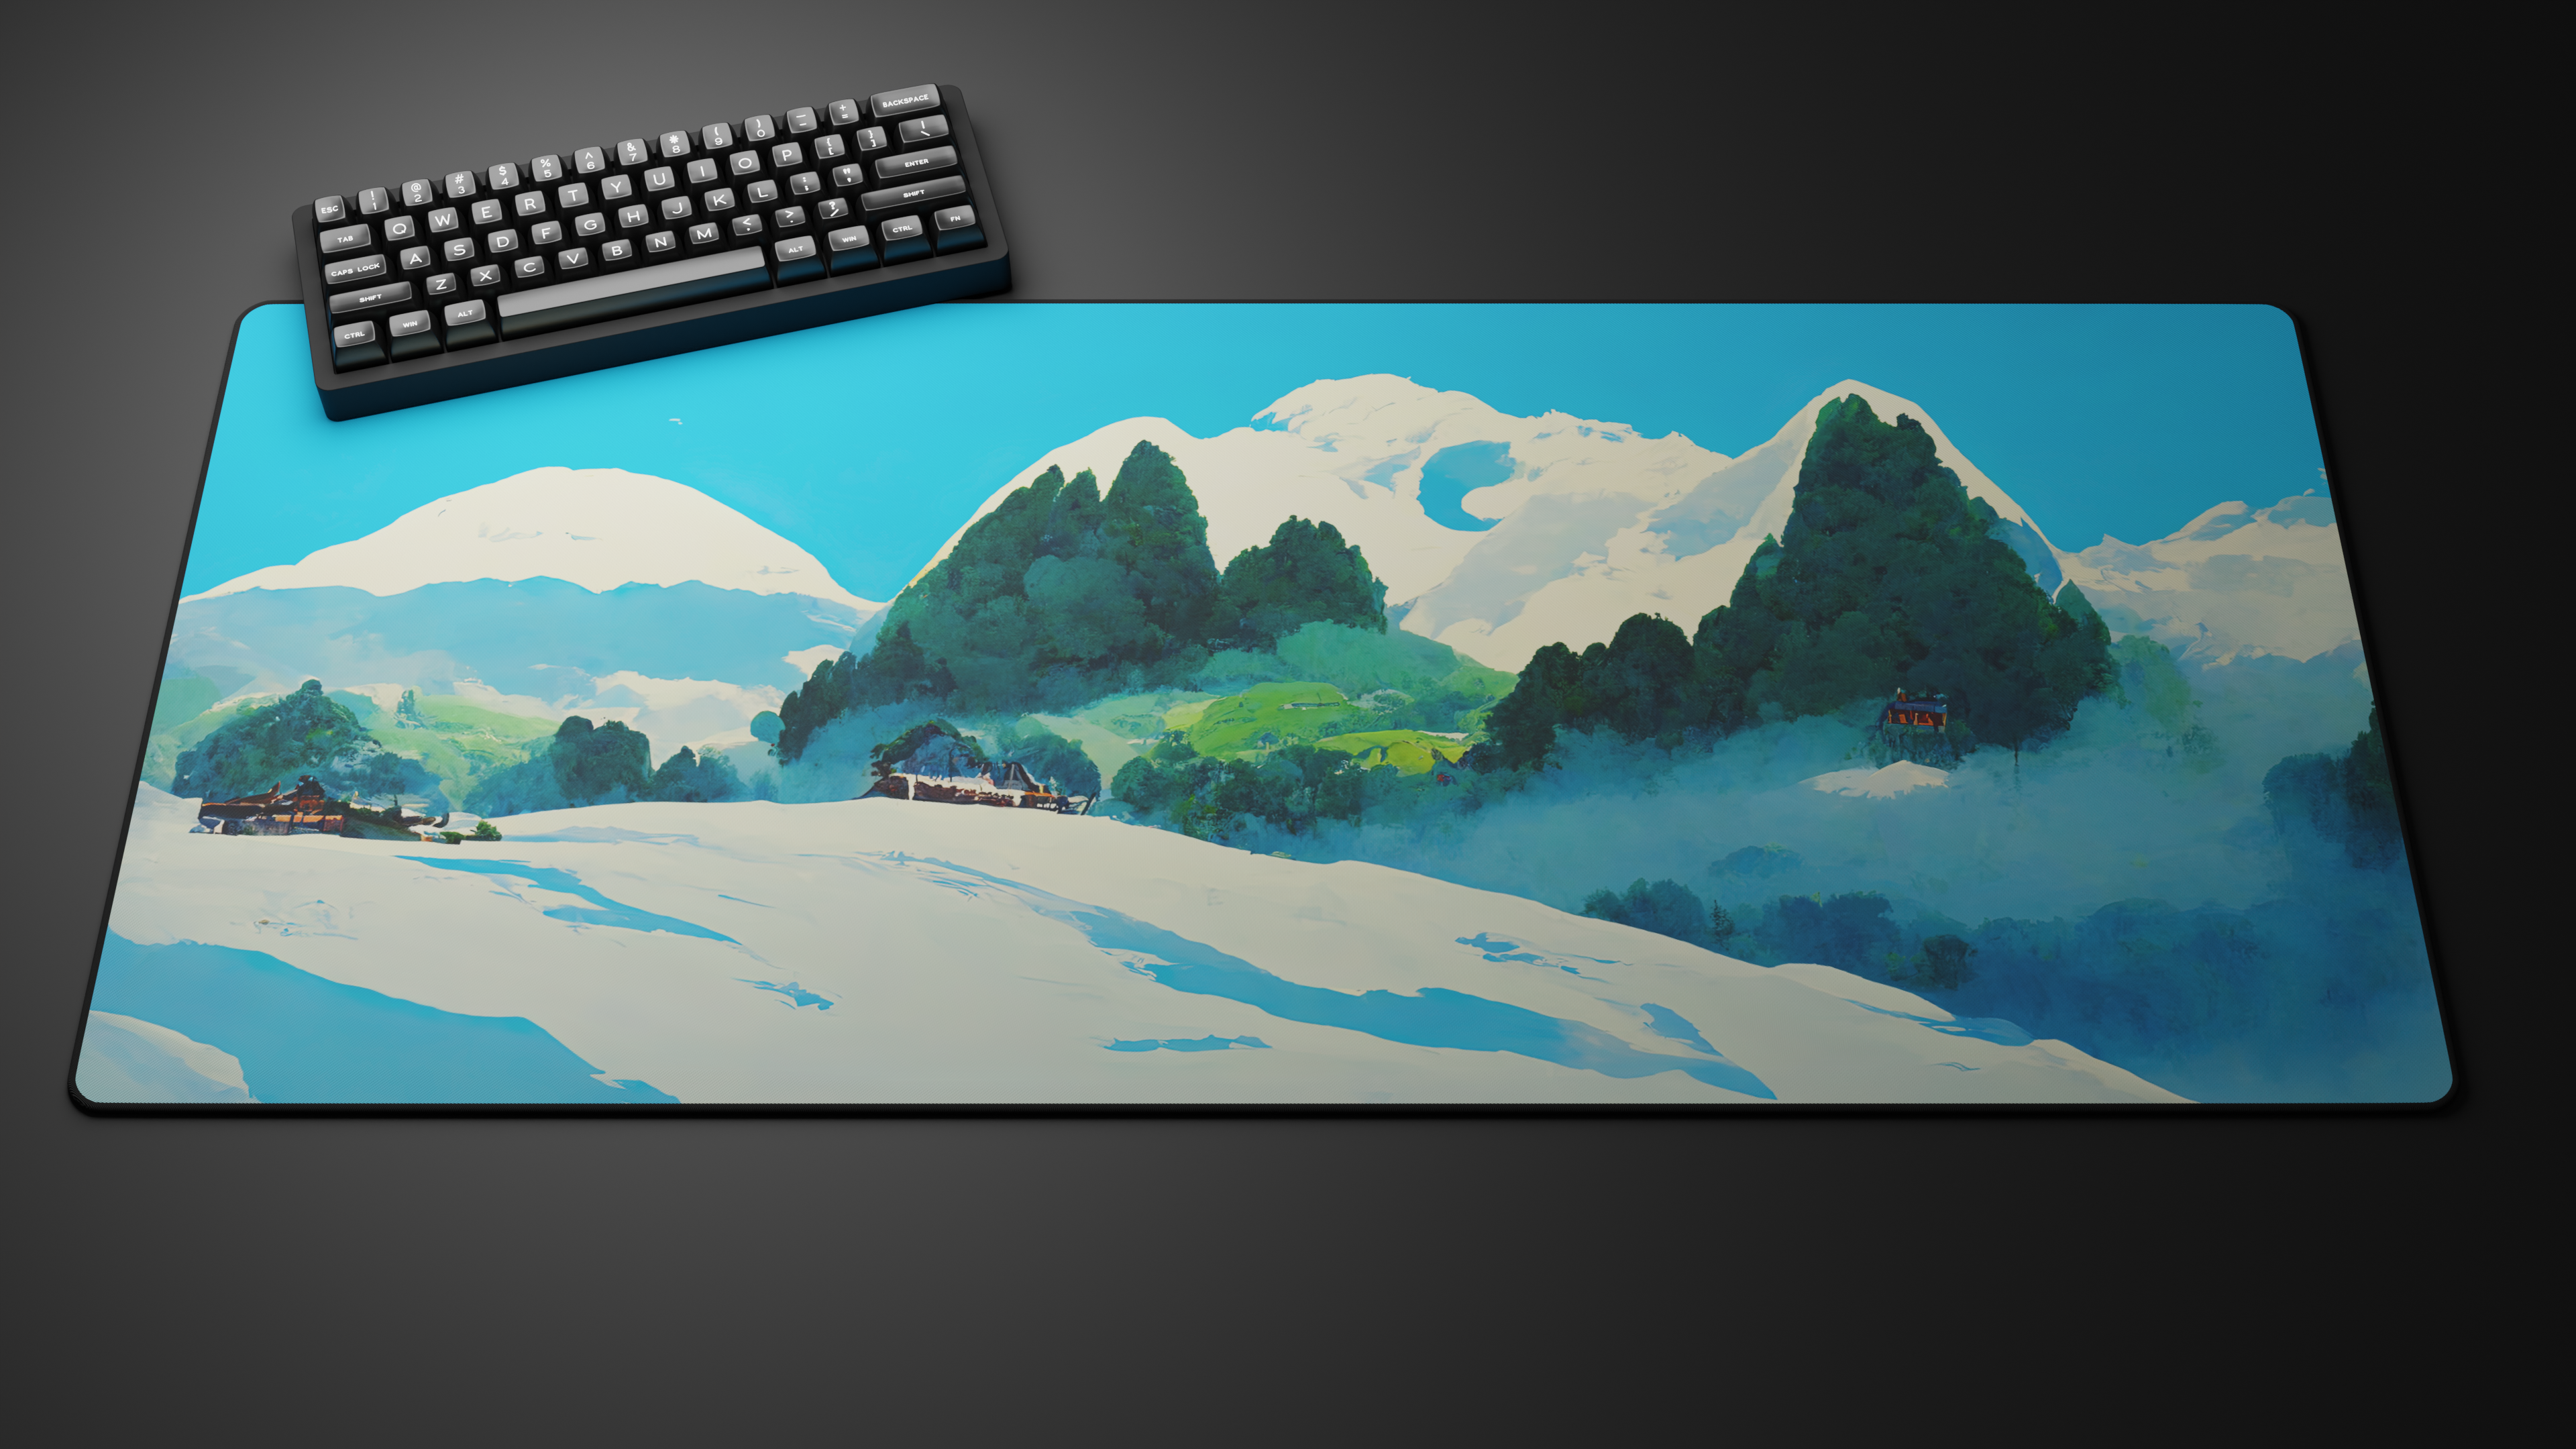 Deskmat 'AI Collection - Snowy Mountains' by glutch